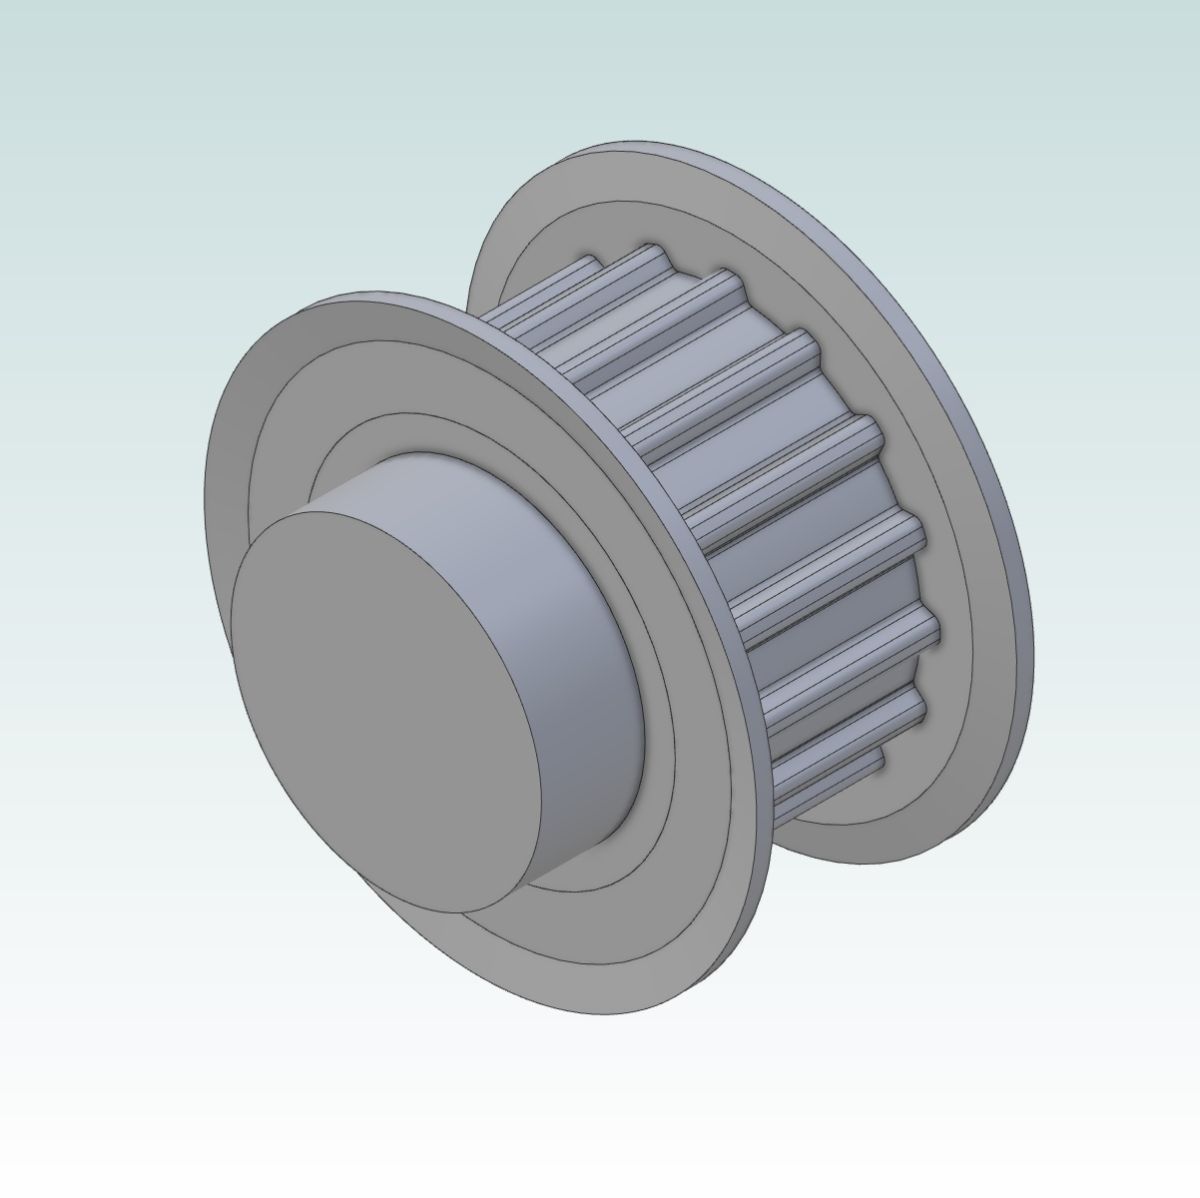 65631 at5 pulley 21at5 z16 for 10mm wide belts render